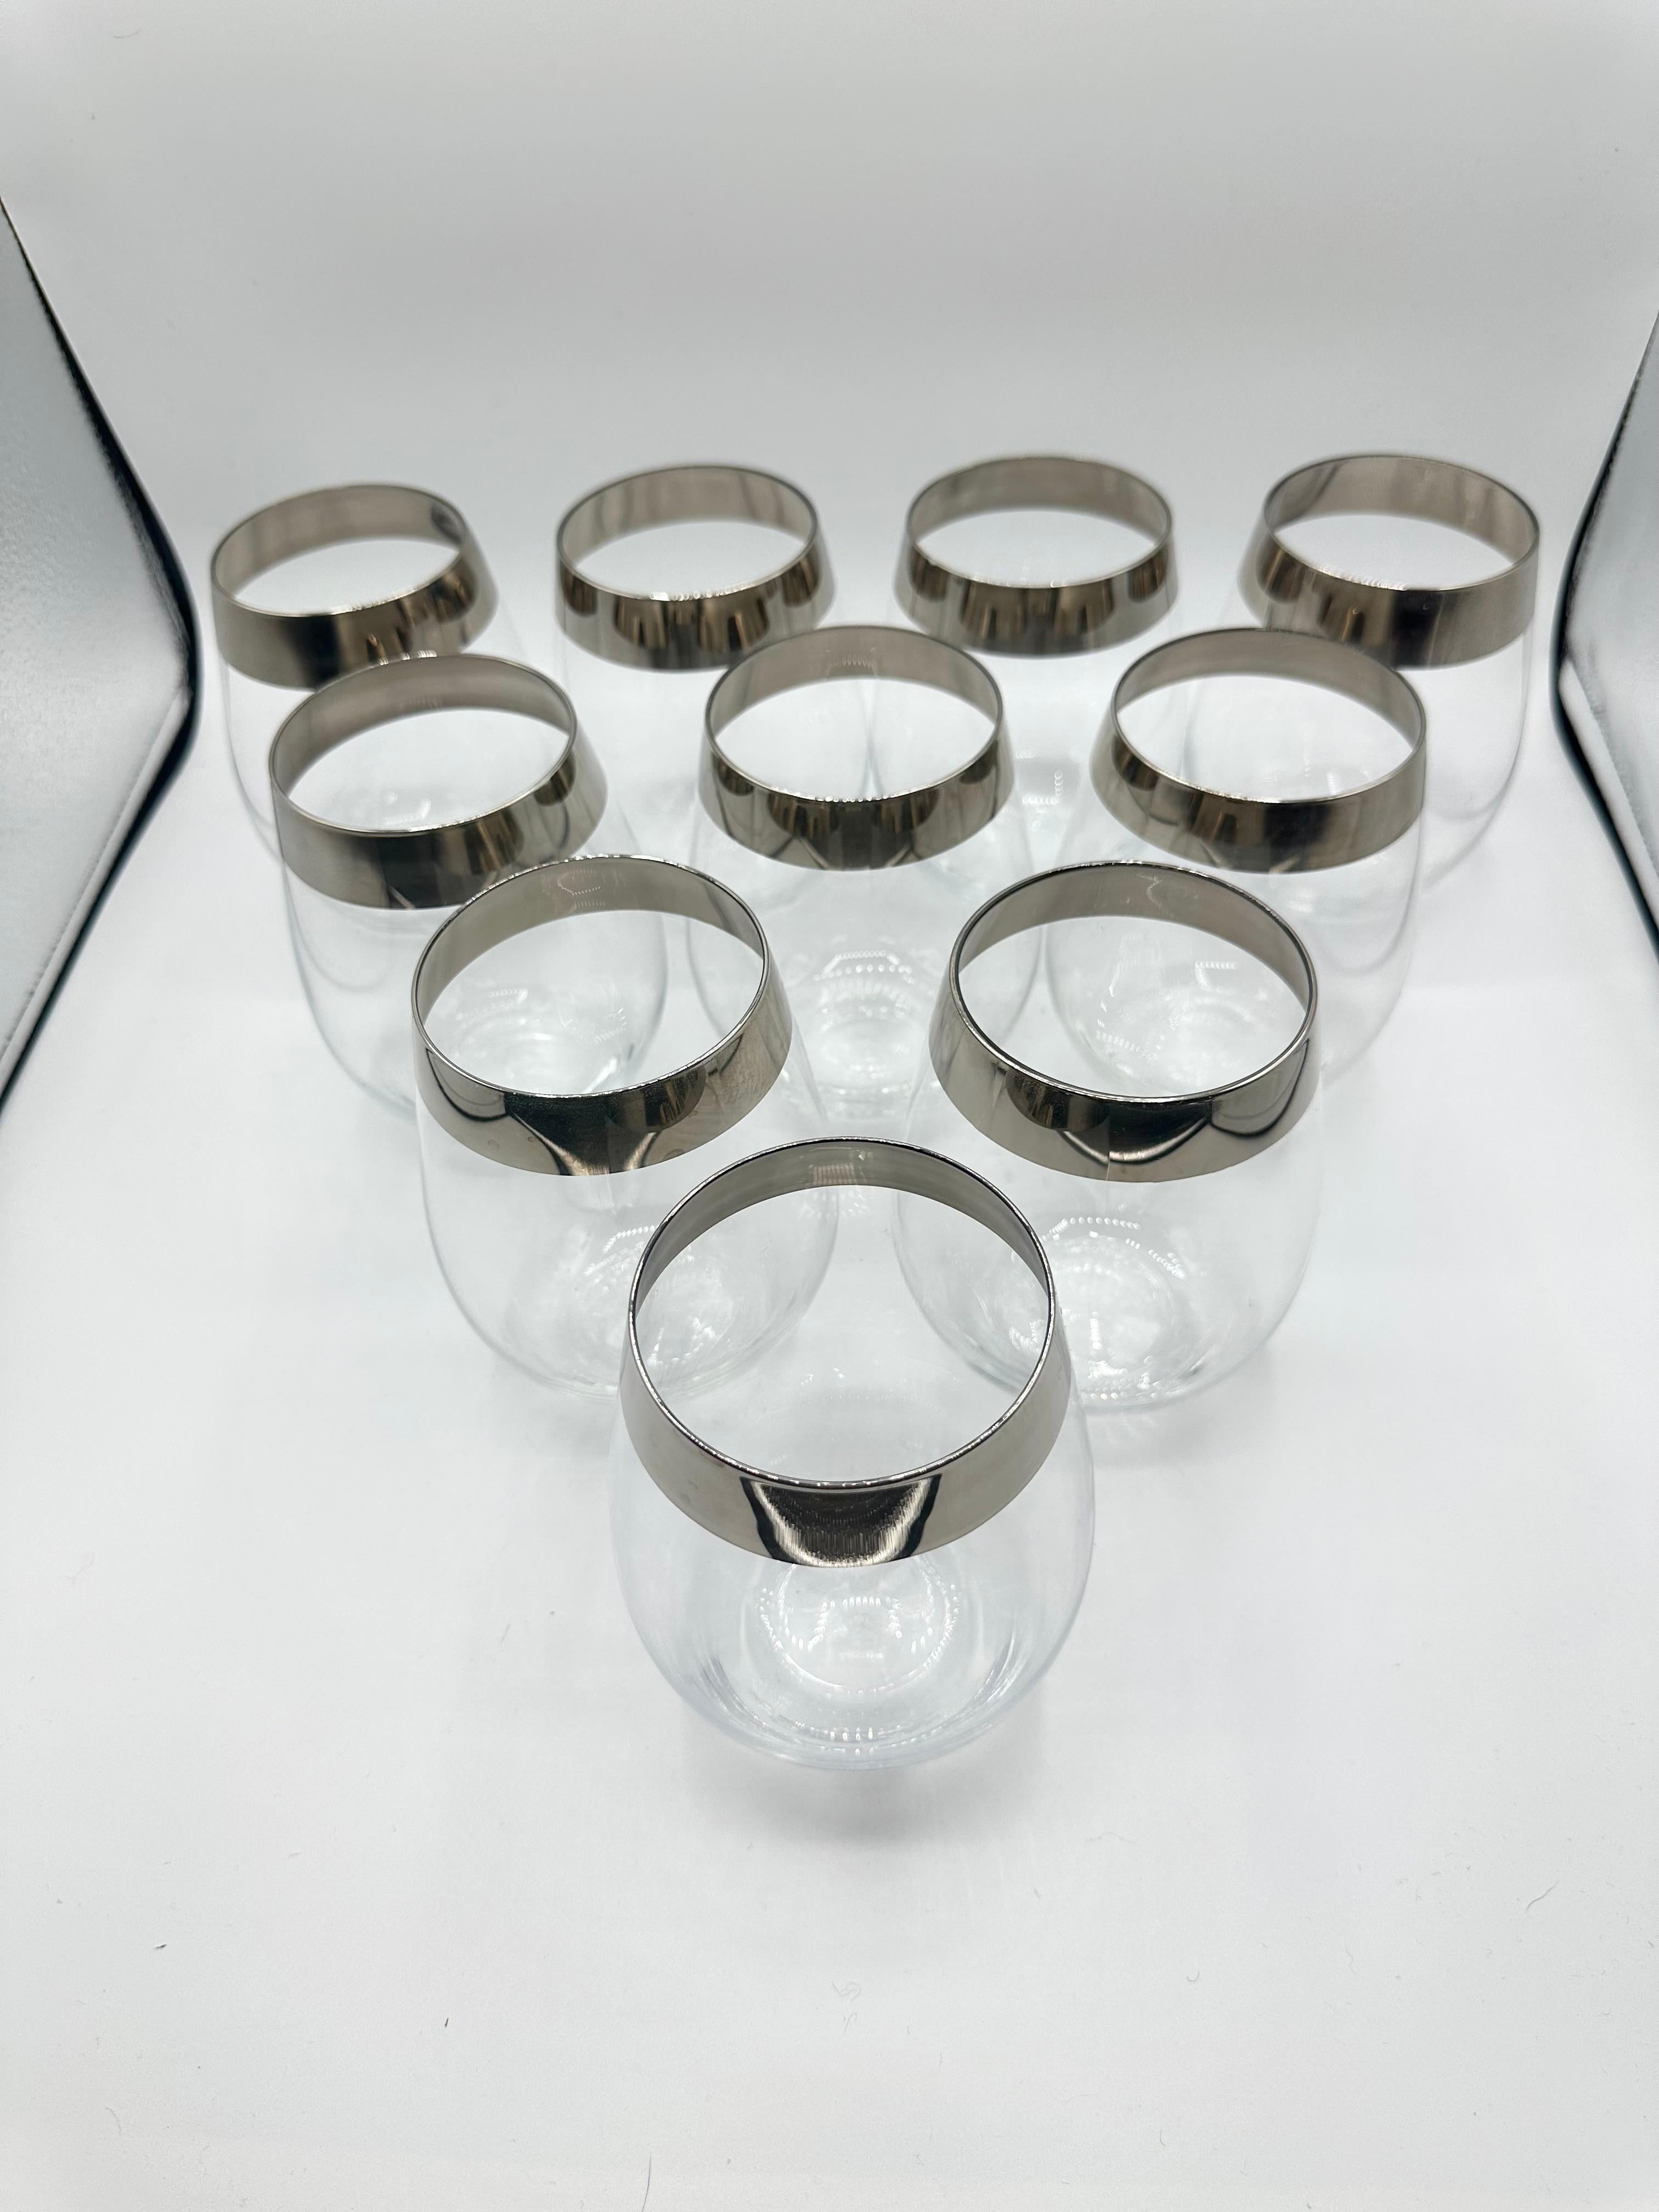 Stunning Set of 10 Dorothy Thorpe Platinum Rimmed Stemless Goblet Wine Glasses! Perfect for entertaining or any wine lover, these mid-century modernism style glasses are crafted from high-quality glass and feature a beautiful platinum thick band